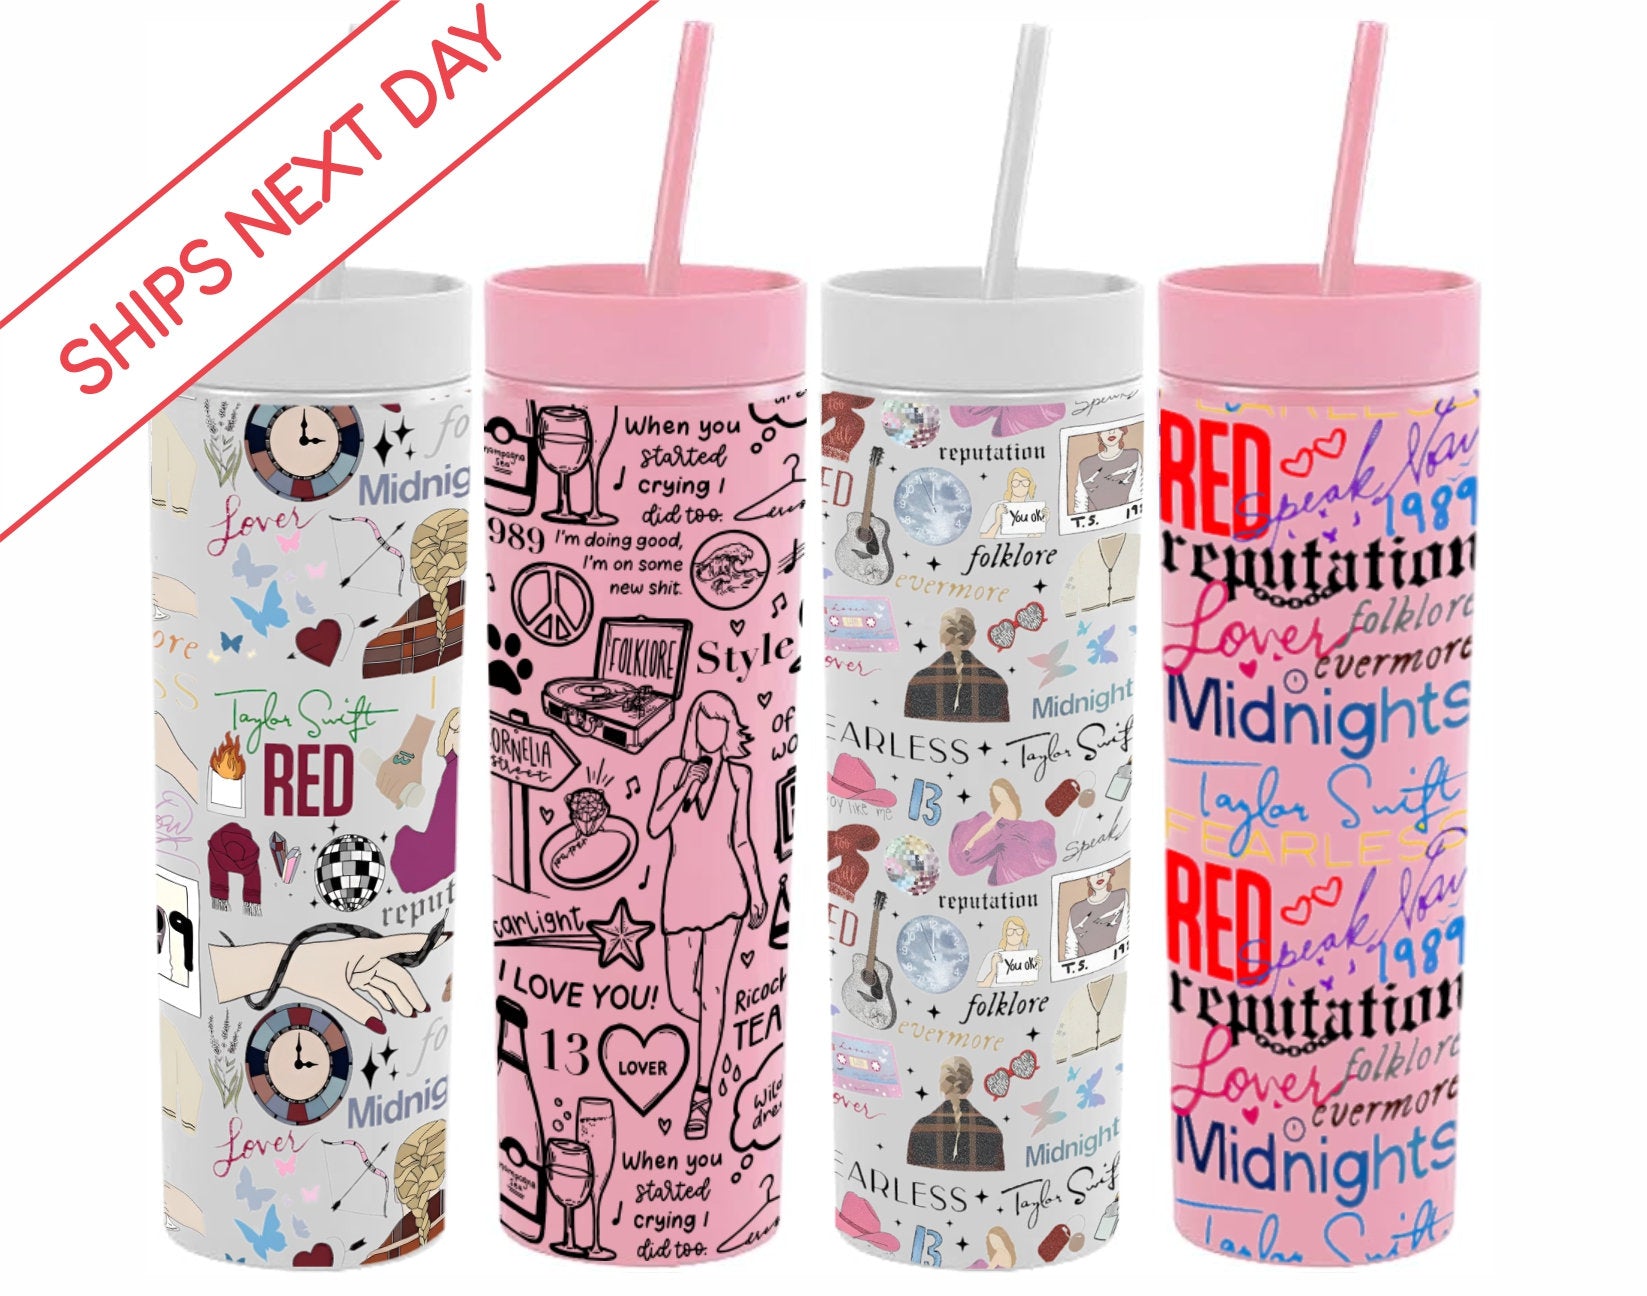 1989 by Taylor Swift Inspired Cup 1989 Inspired Cold Beverage Cup 1989 Era  by Taylor Swift Tumbler Taylor Swift Merch 